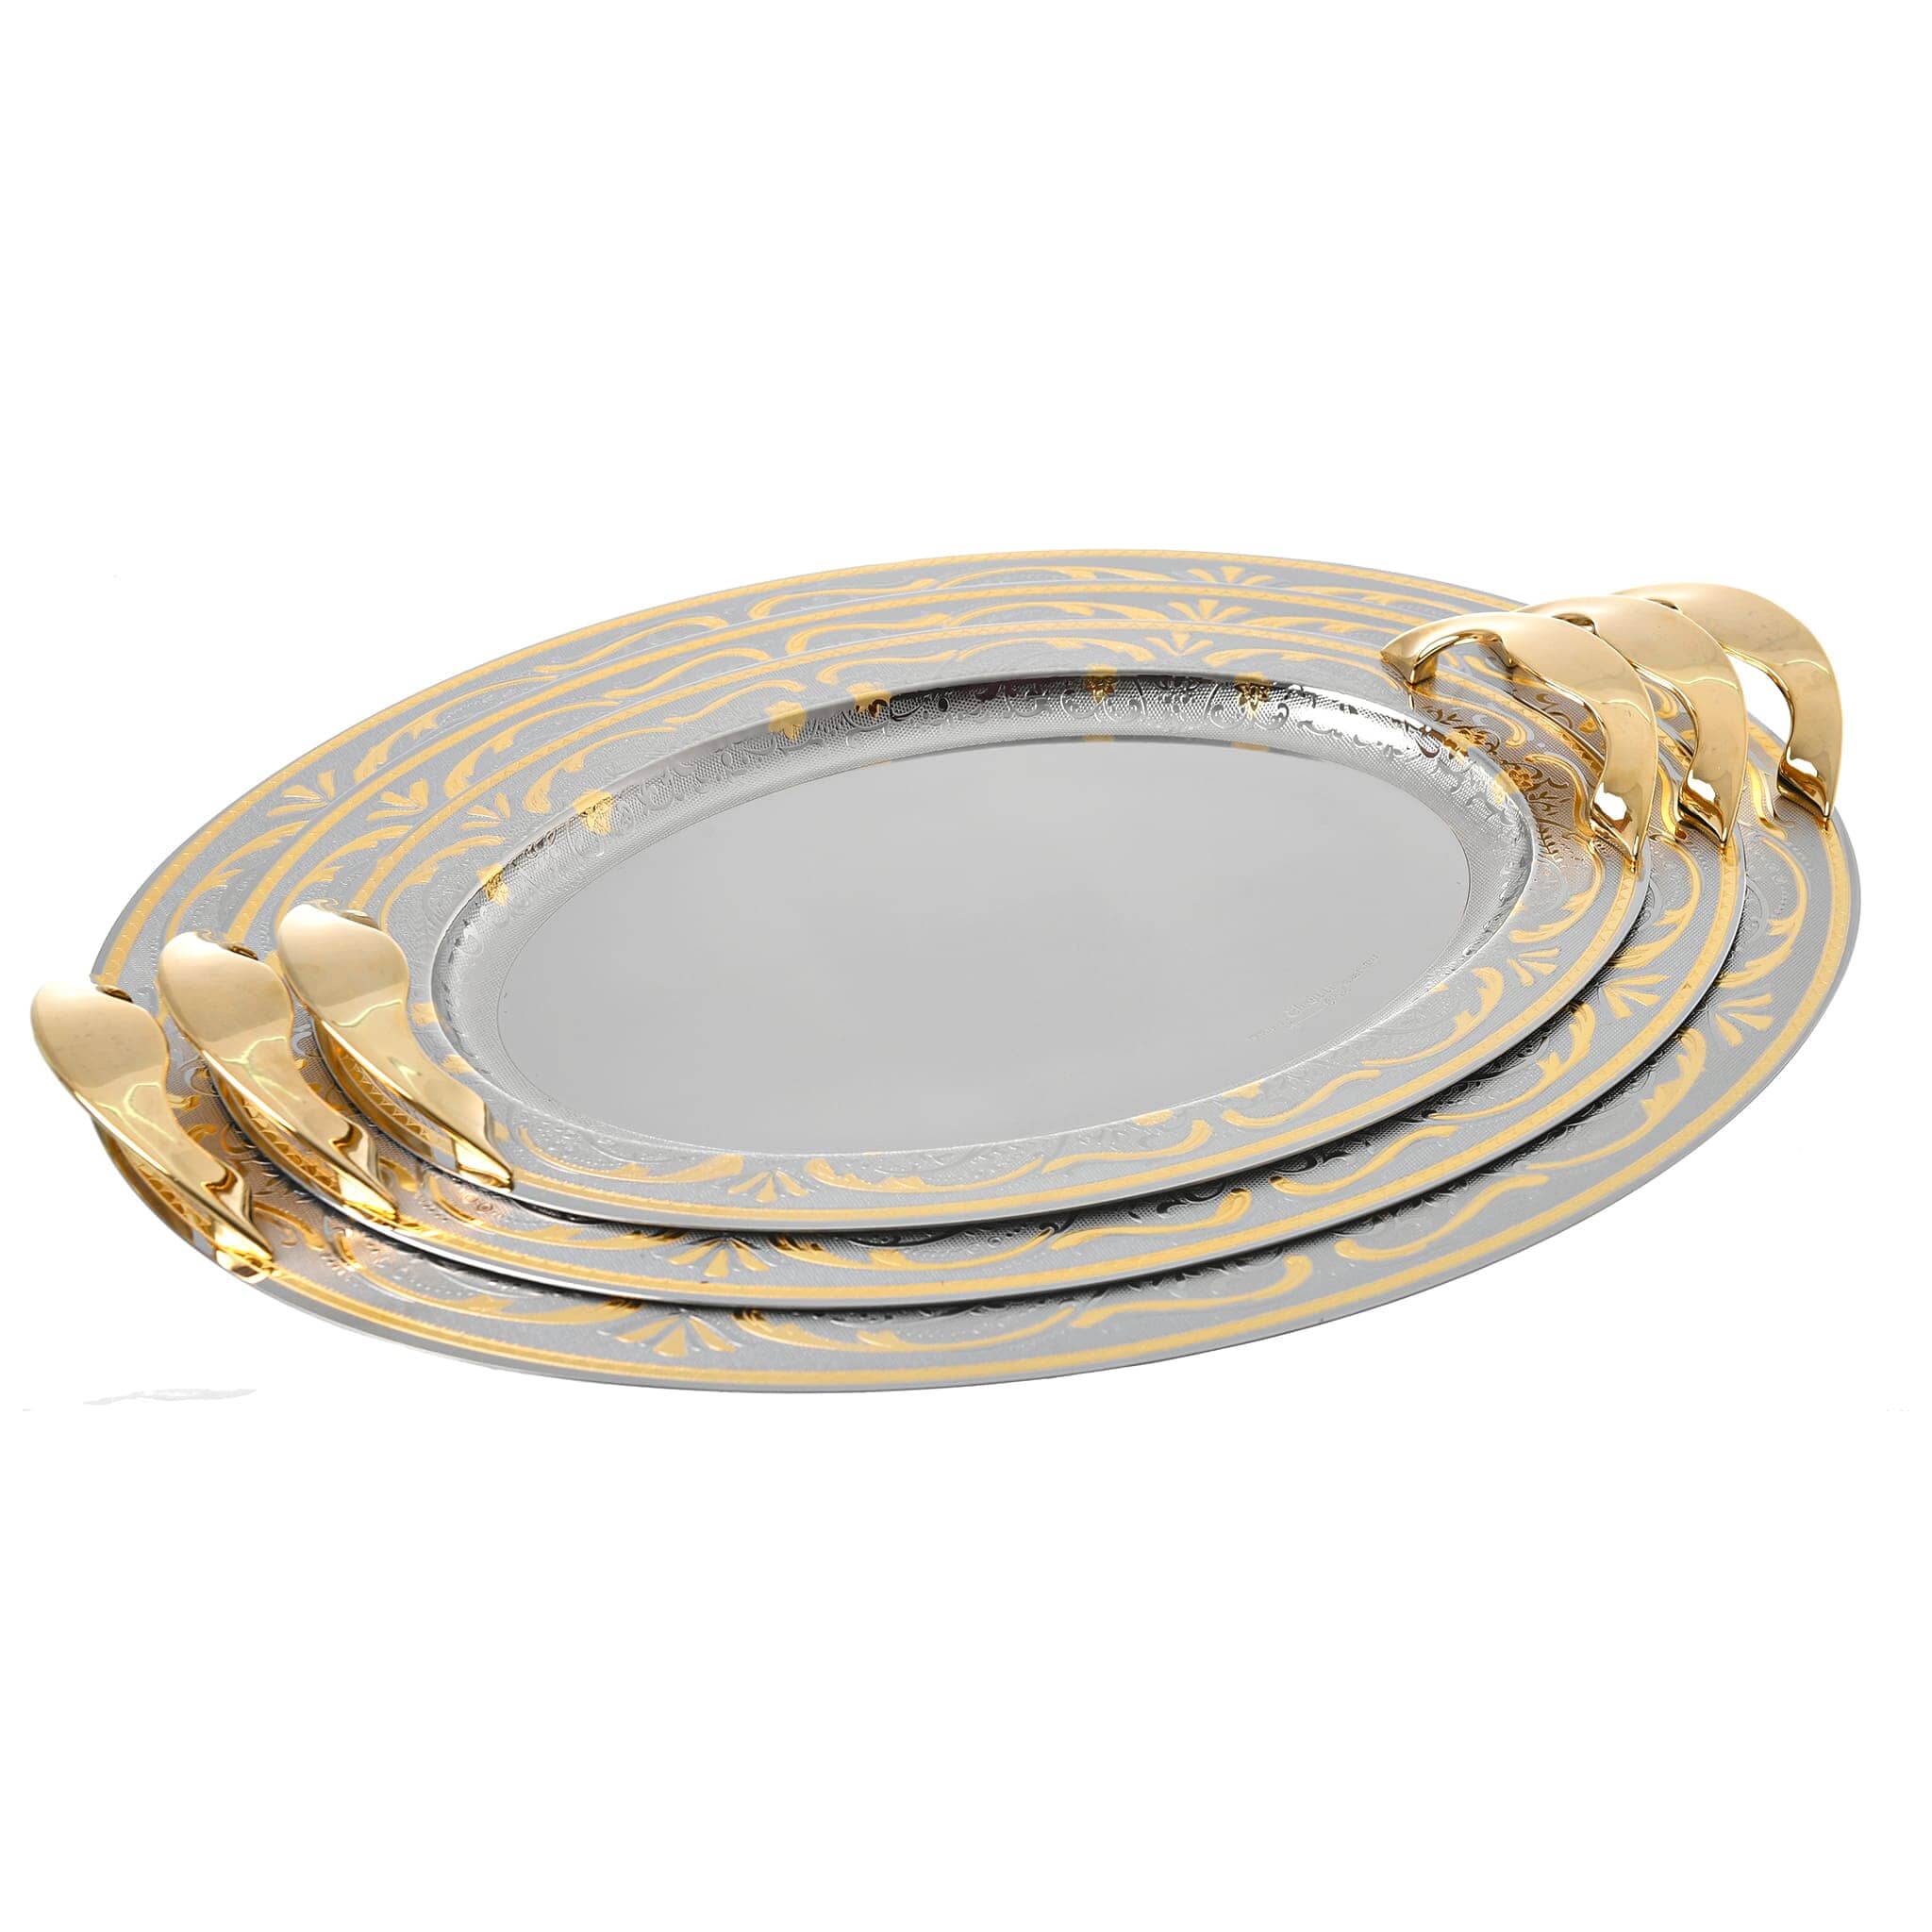 Elegant Gioiel - Oval Tray Set with Handles 3 Pieces - Gold - Stainless Steel 18/10 - 75000432